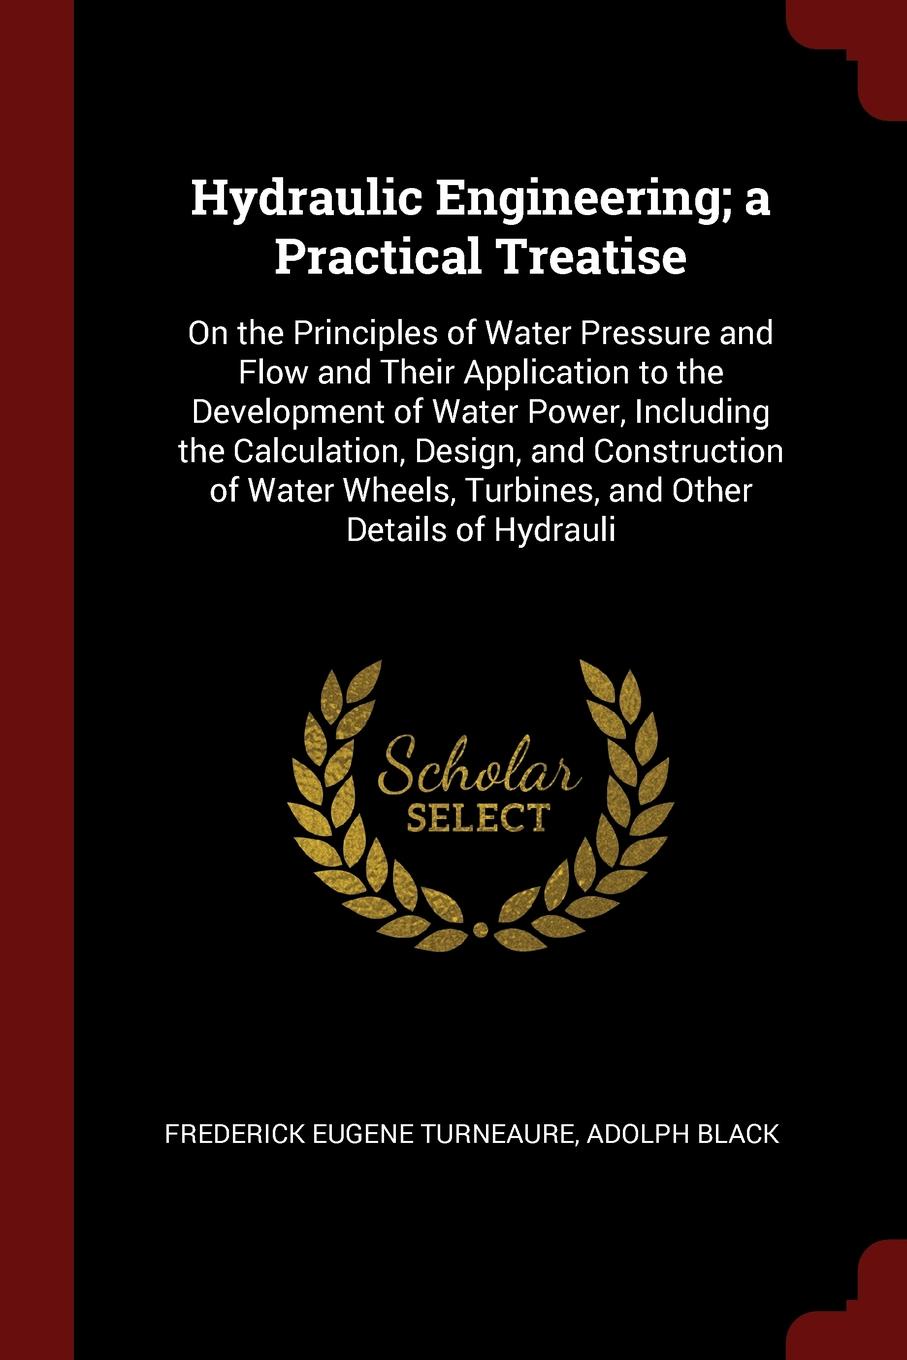 Hydraulic Engineering; a Practical Treatise. On the Principles of Water Pressure and Flow and Their Application to the Development of Water Power, Including the Calculation, Design, and Construction of Water Wheels, Turbines, and Other Details of ...